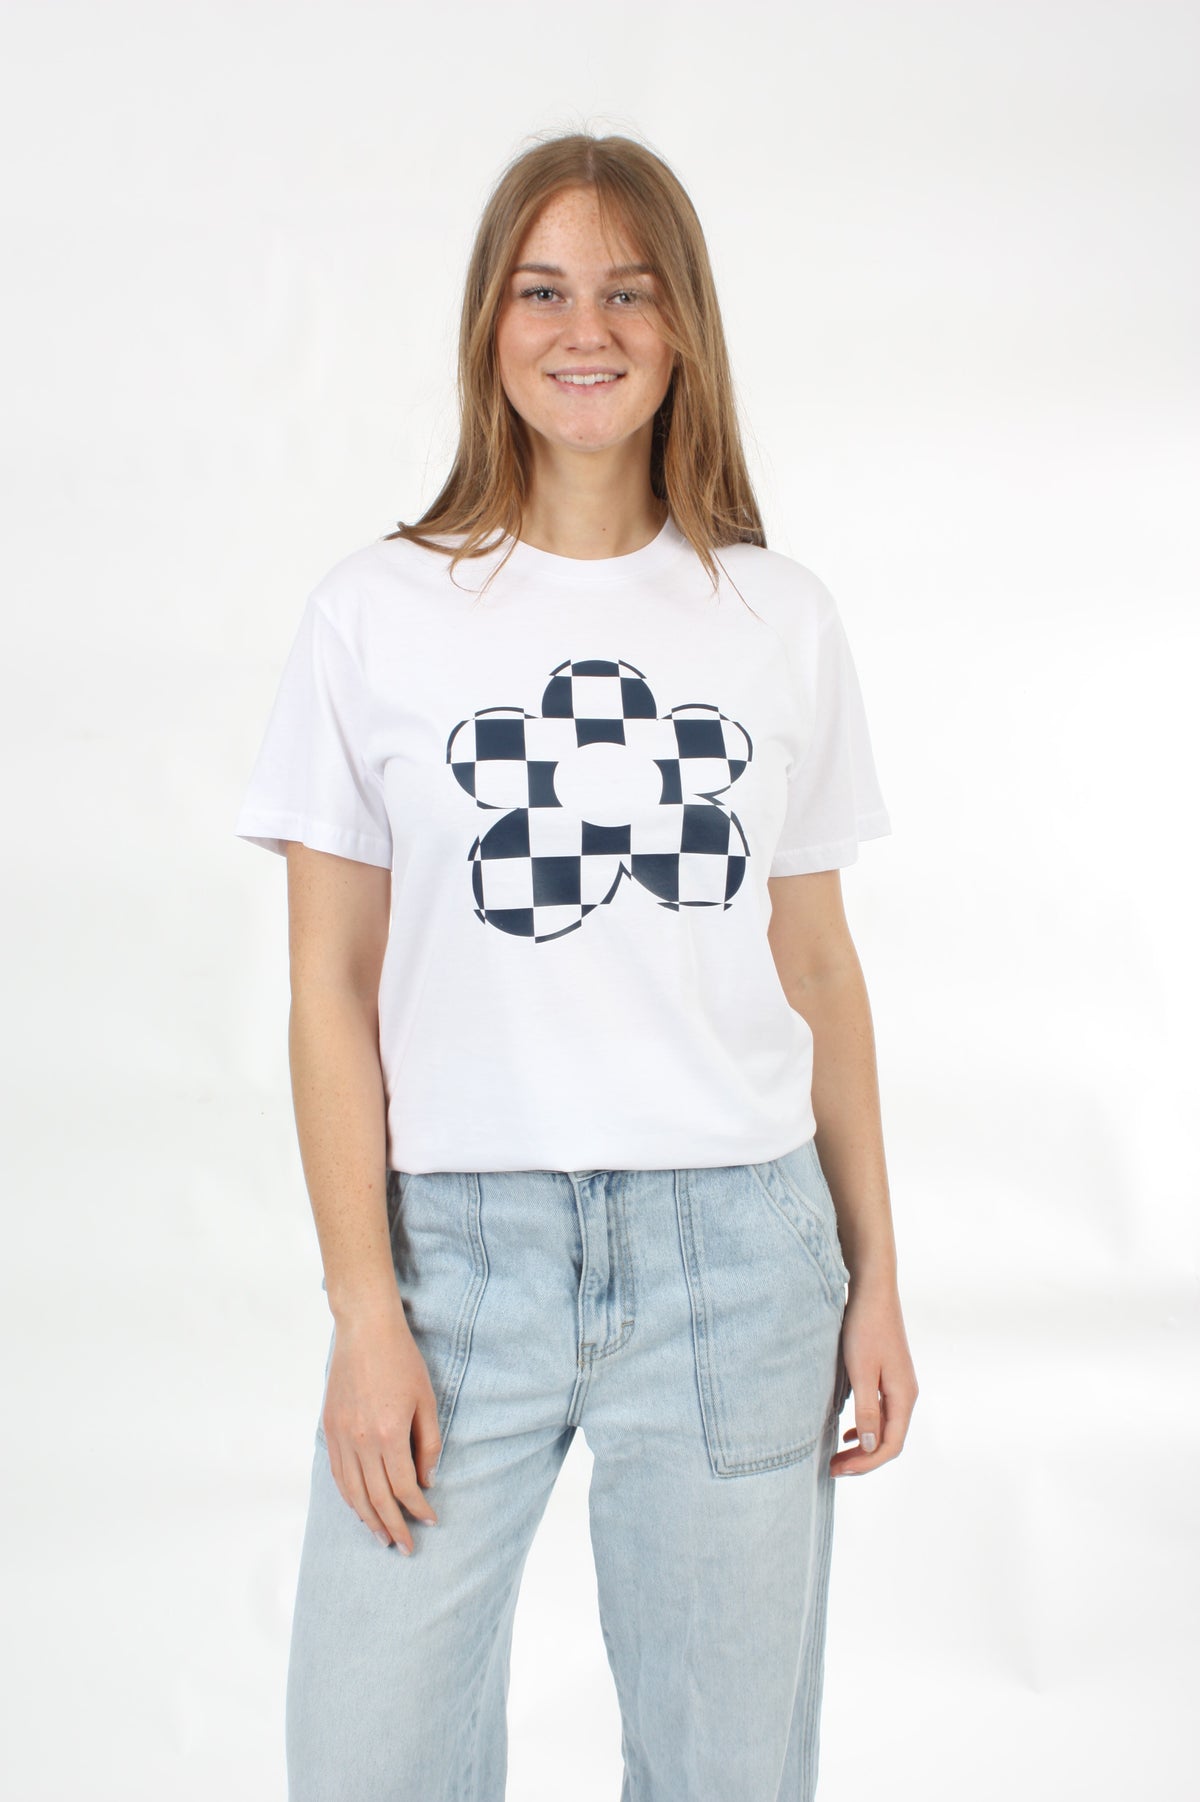 Tee Shirt -  with Check Flower Print - Pre Order